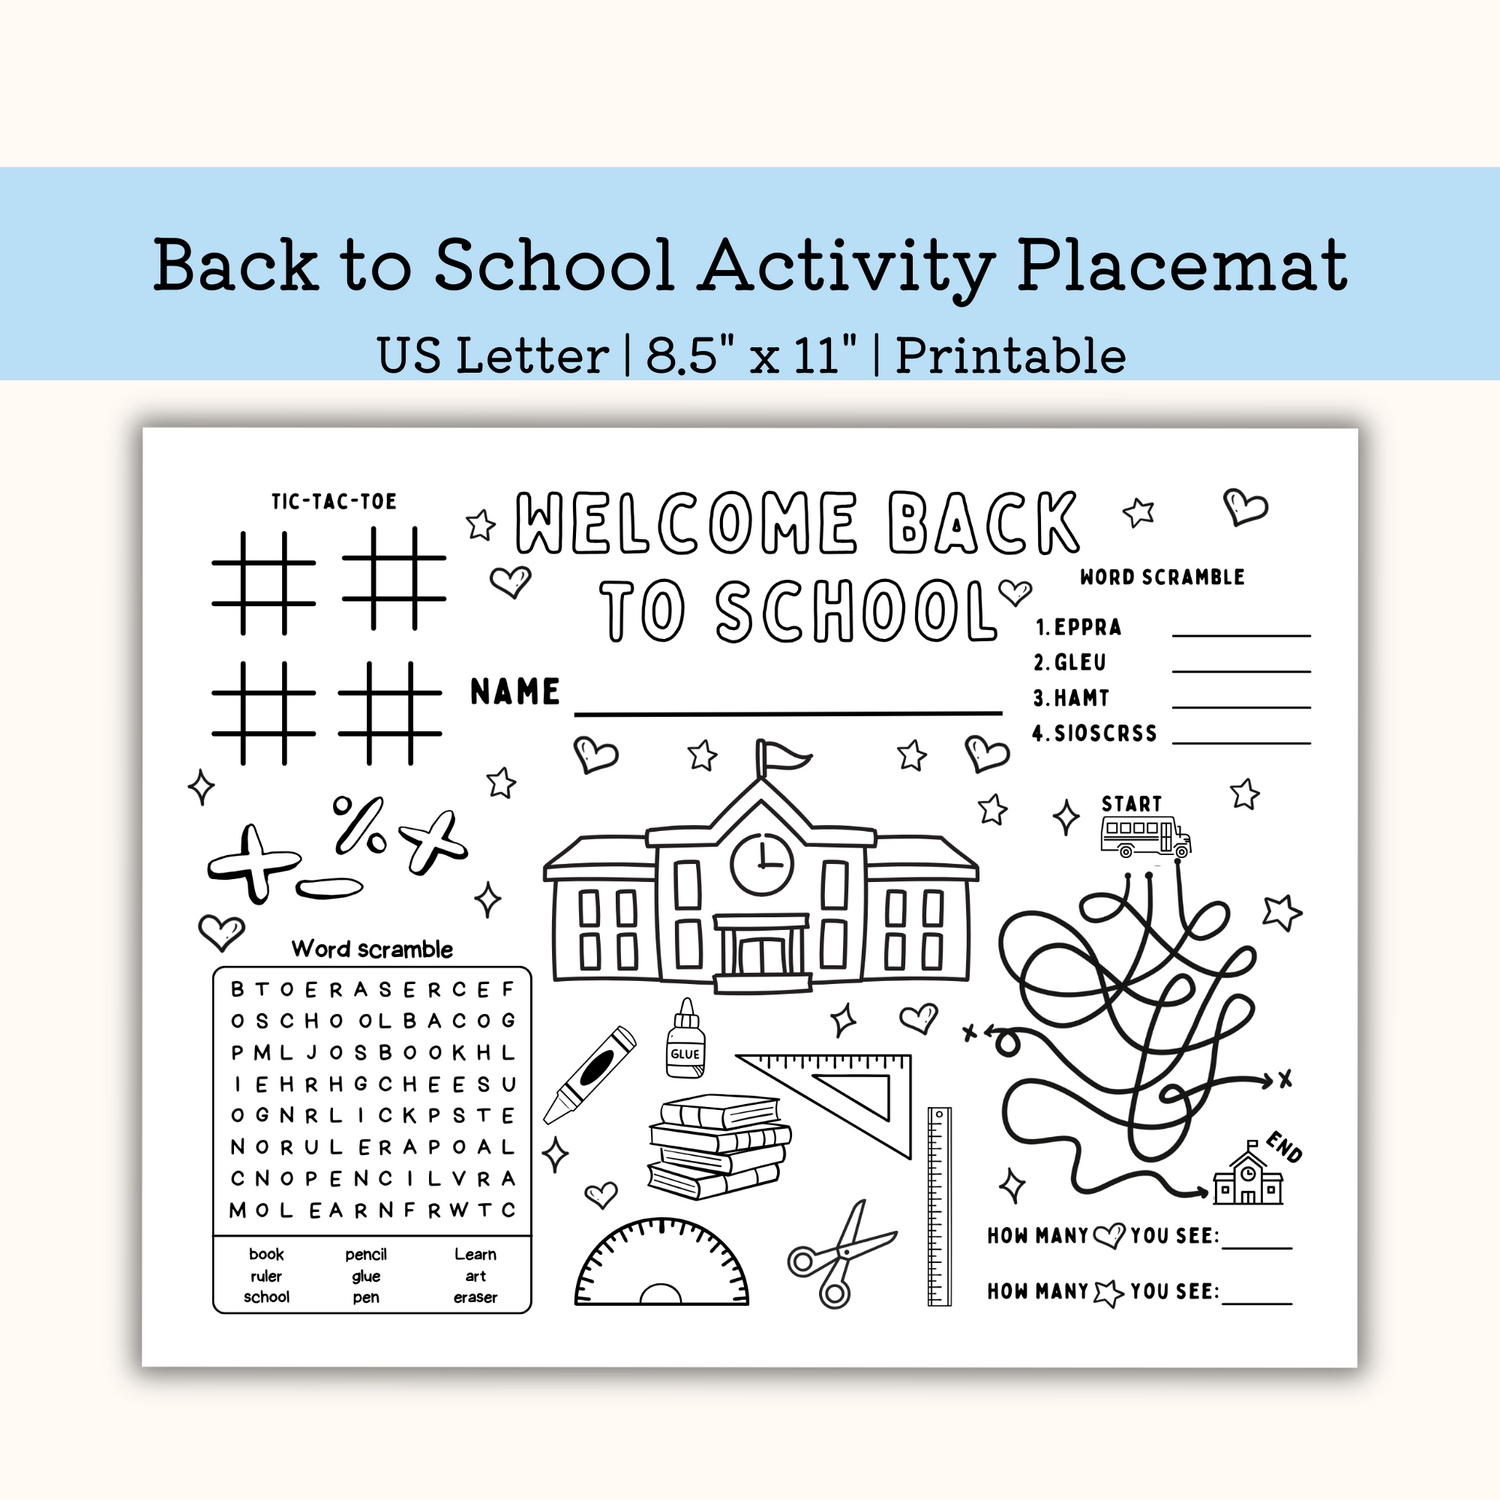 Printable Back to School Activity Placemat